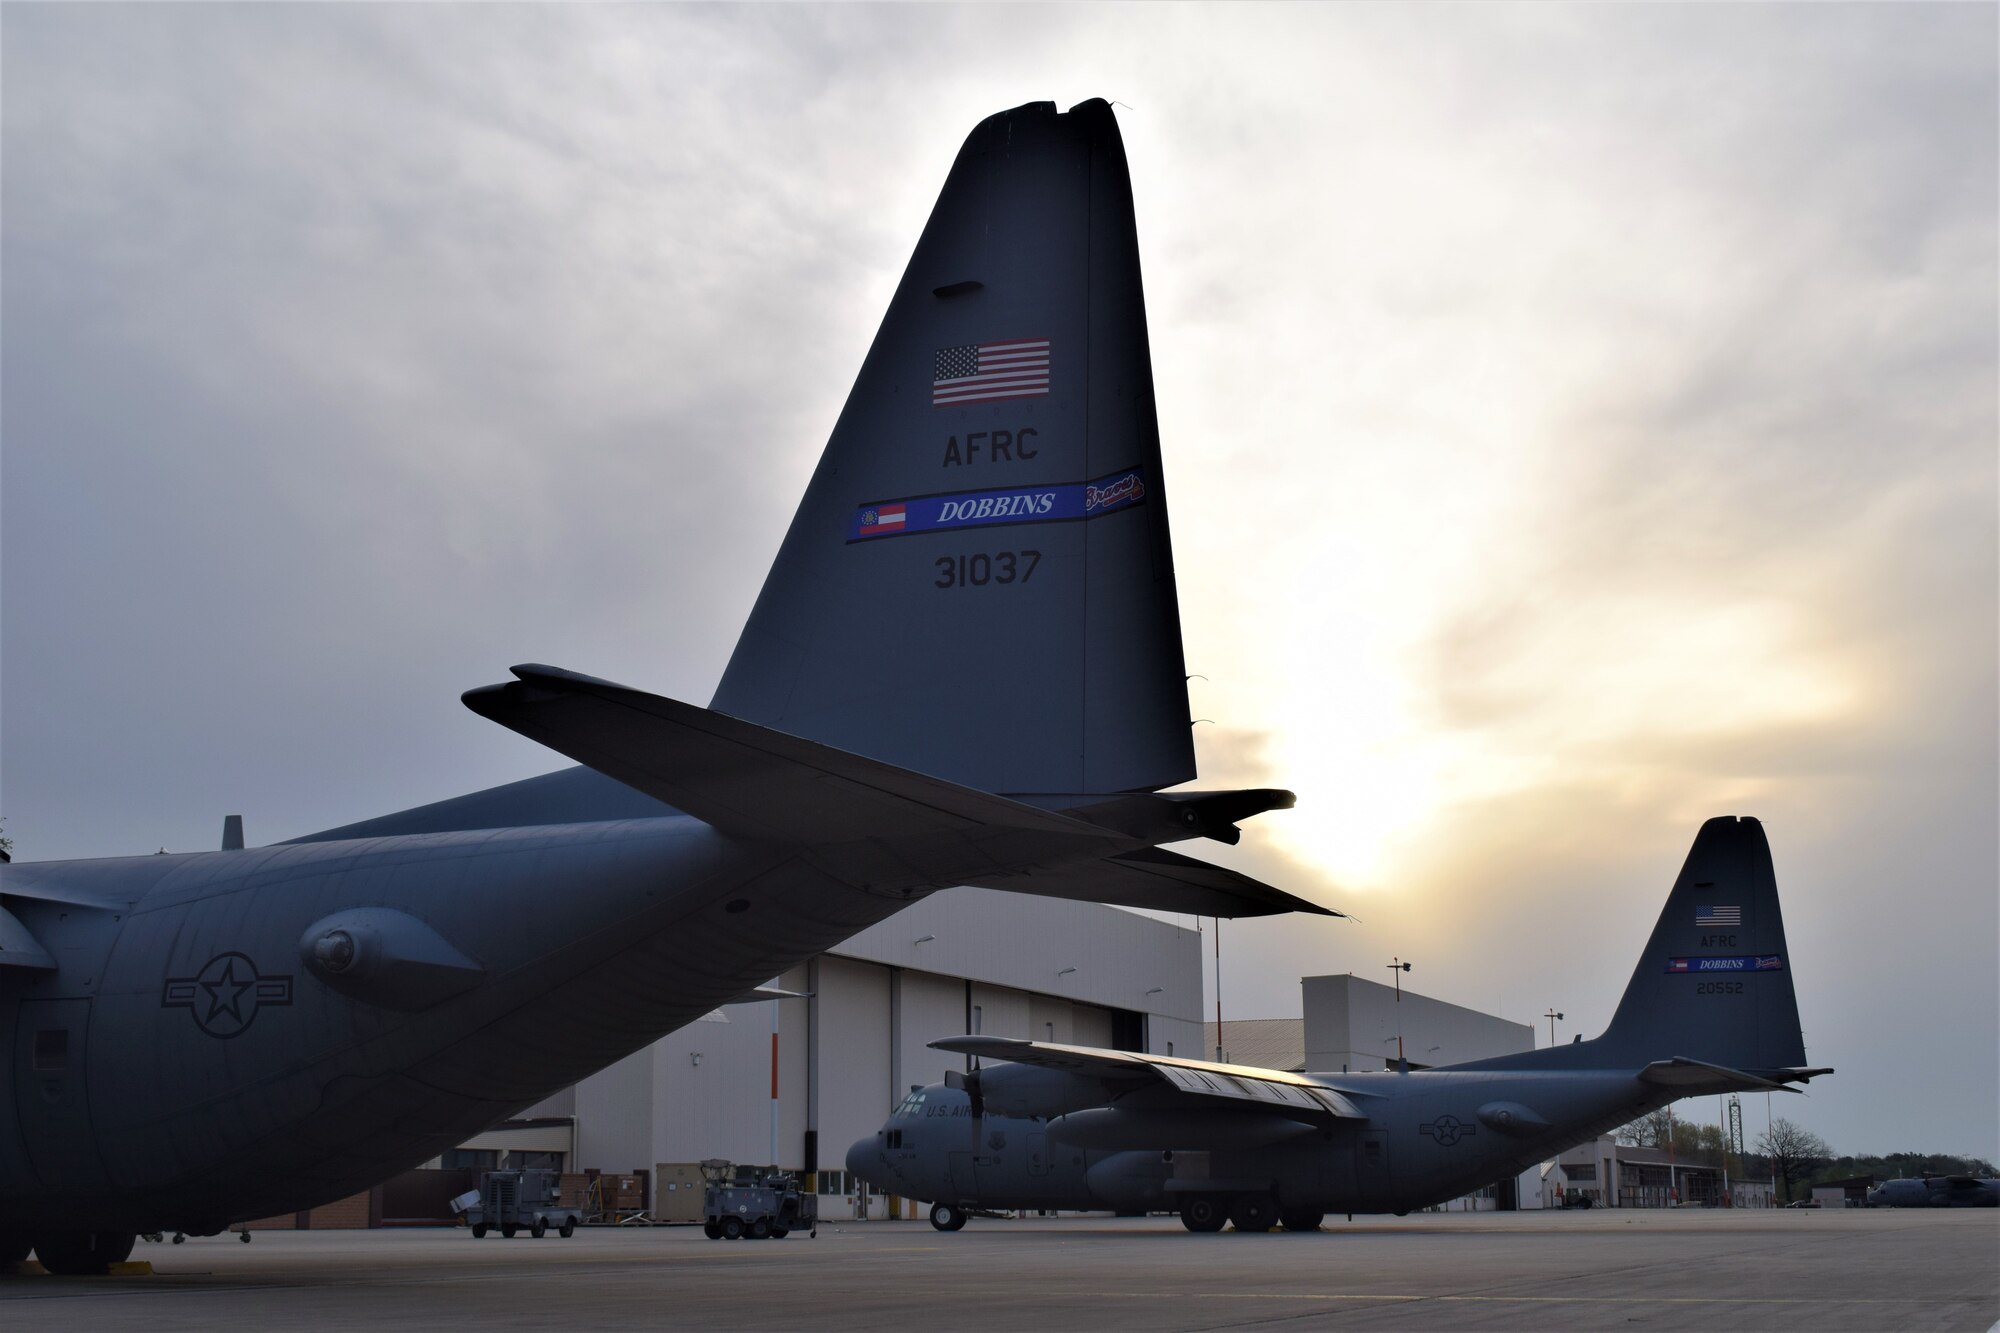 C-130H Hercules aircraft assigned to the 700th Airlift Squadron, 94th Airlift Wing, Dobbins Air Reserve Base, Ga., await a mission during Silver Arrow 19, Ramstein Air Base, Germany, April 23, 2019. Silver Arrow 19 is a six-month surge of airlift capability in the U.S. European Command theater of operations, supported by Airmen from the U.S. Air Force Reserves and Air National Guard. 

At any time, Silver Arrow 19 allows for two C-130H aircraft to augment U.S. combatant command requirements, support readiness events under the Chairman of the Joint Chiefs of Staff (CJCS) exercise program, and enables other unique mission and unit training requirements as needed. 



Silver Arrow 19 is underwritten by the European Deterrence Initiative (EDI), a Department of Defense fund that enhances responsiveness and readiness by pre-positioning assets and equipment, as well as by improving infrastructure to support day-to-day activities within the U.S. European Command area of responsibility. The EDI also enhances the U.S.’s ability to provide a rapid response against threats made by aggressive regional actors.